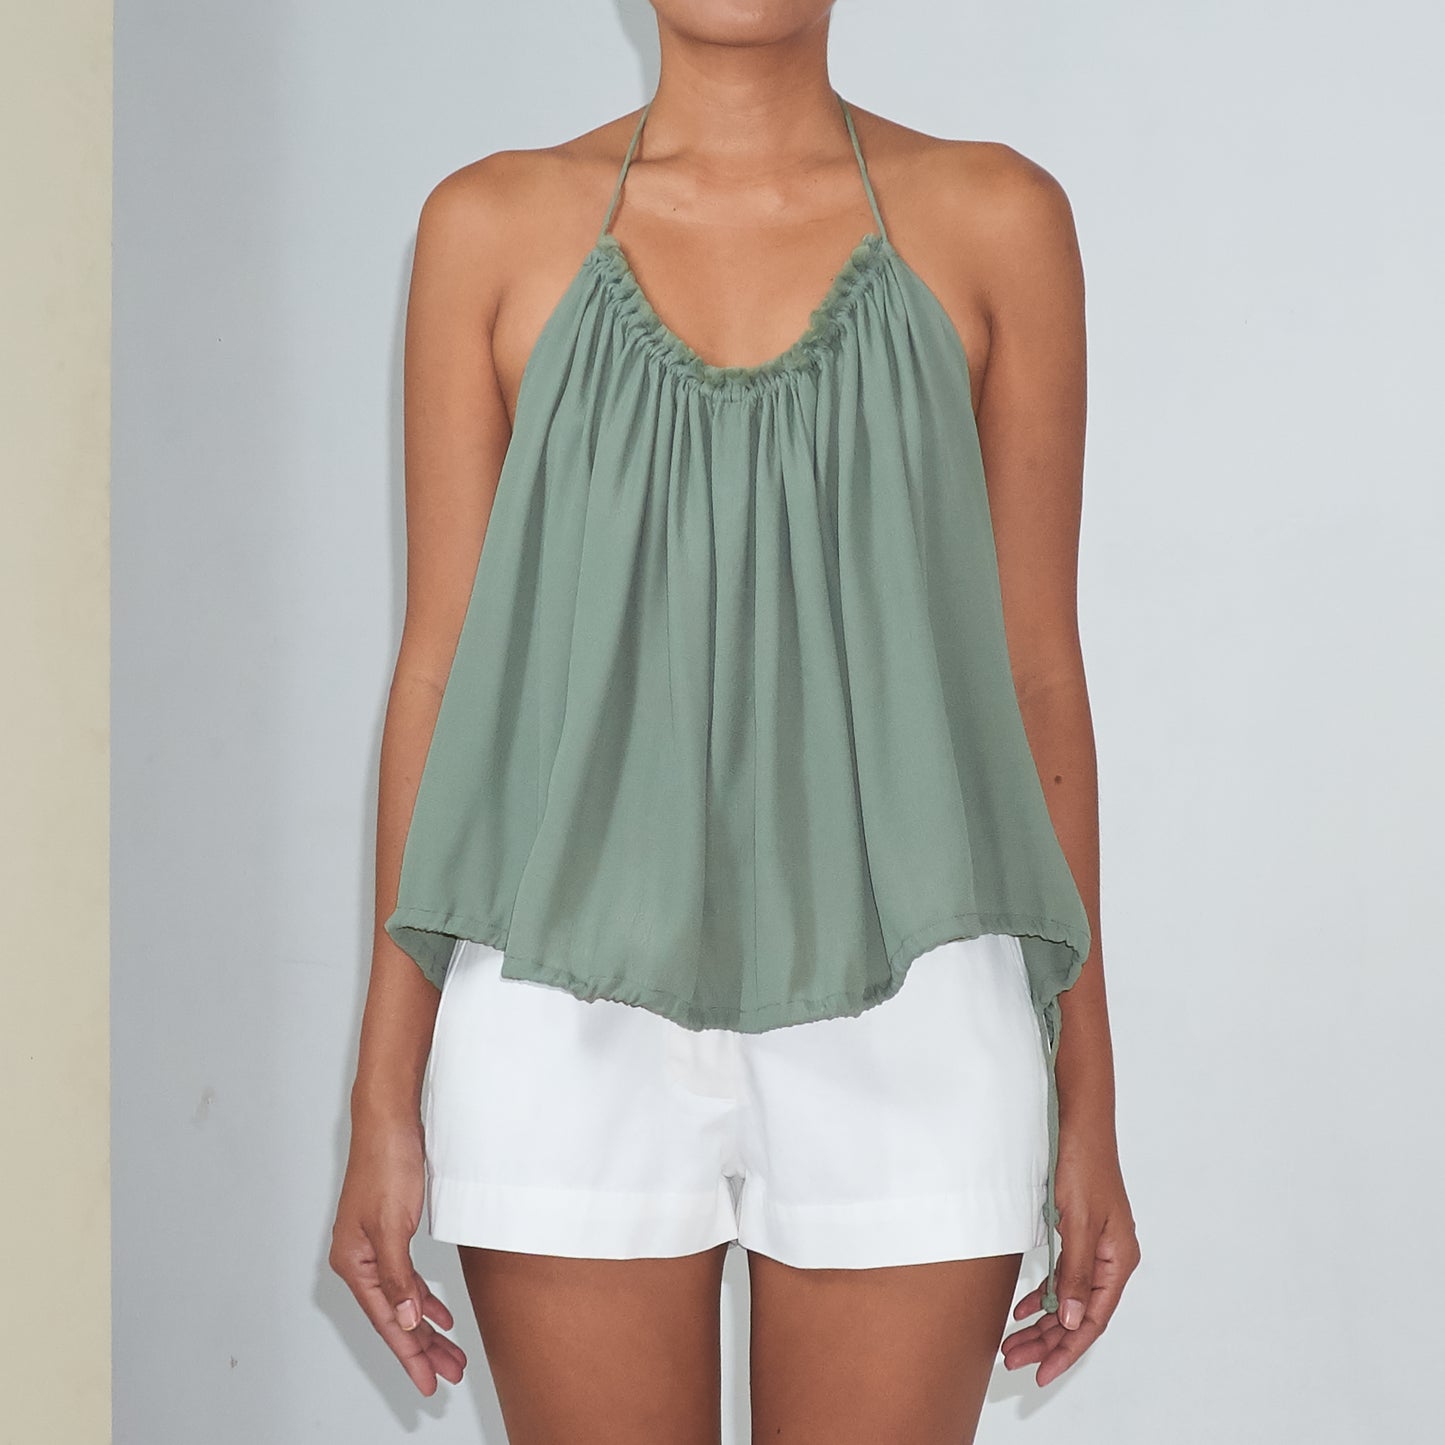 RUSH HALTER TOP - Rayon Fujette Crepe | Light Olive Green